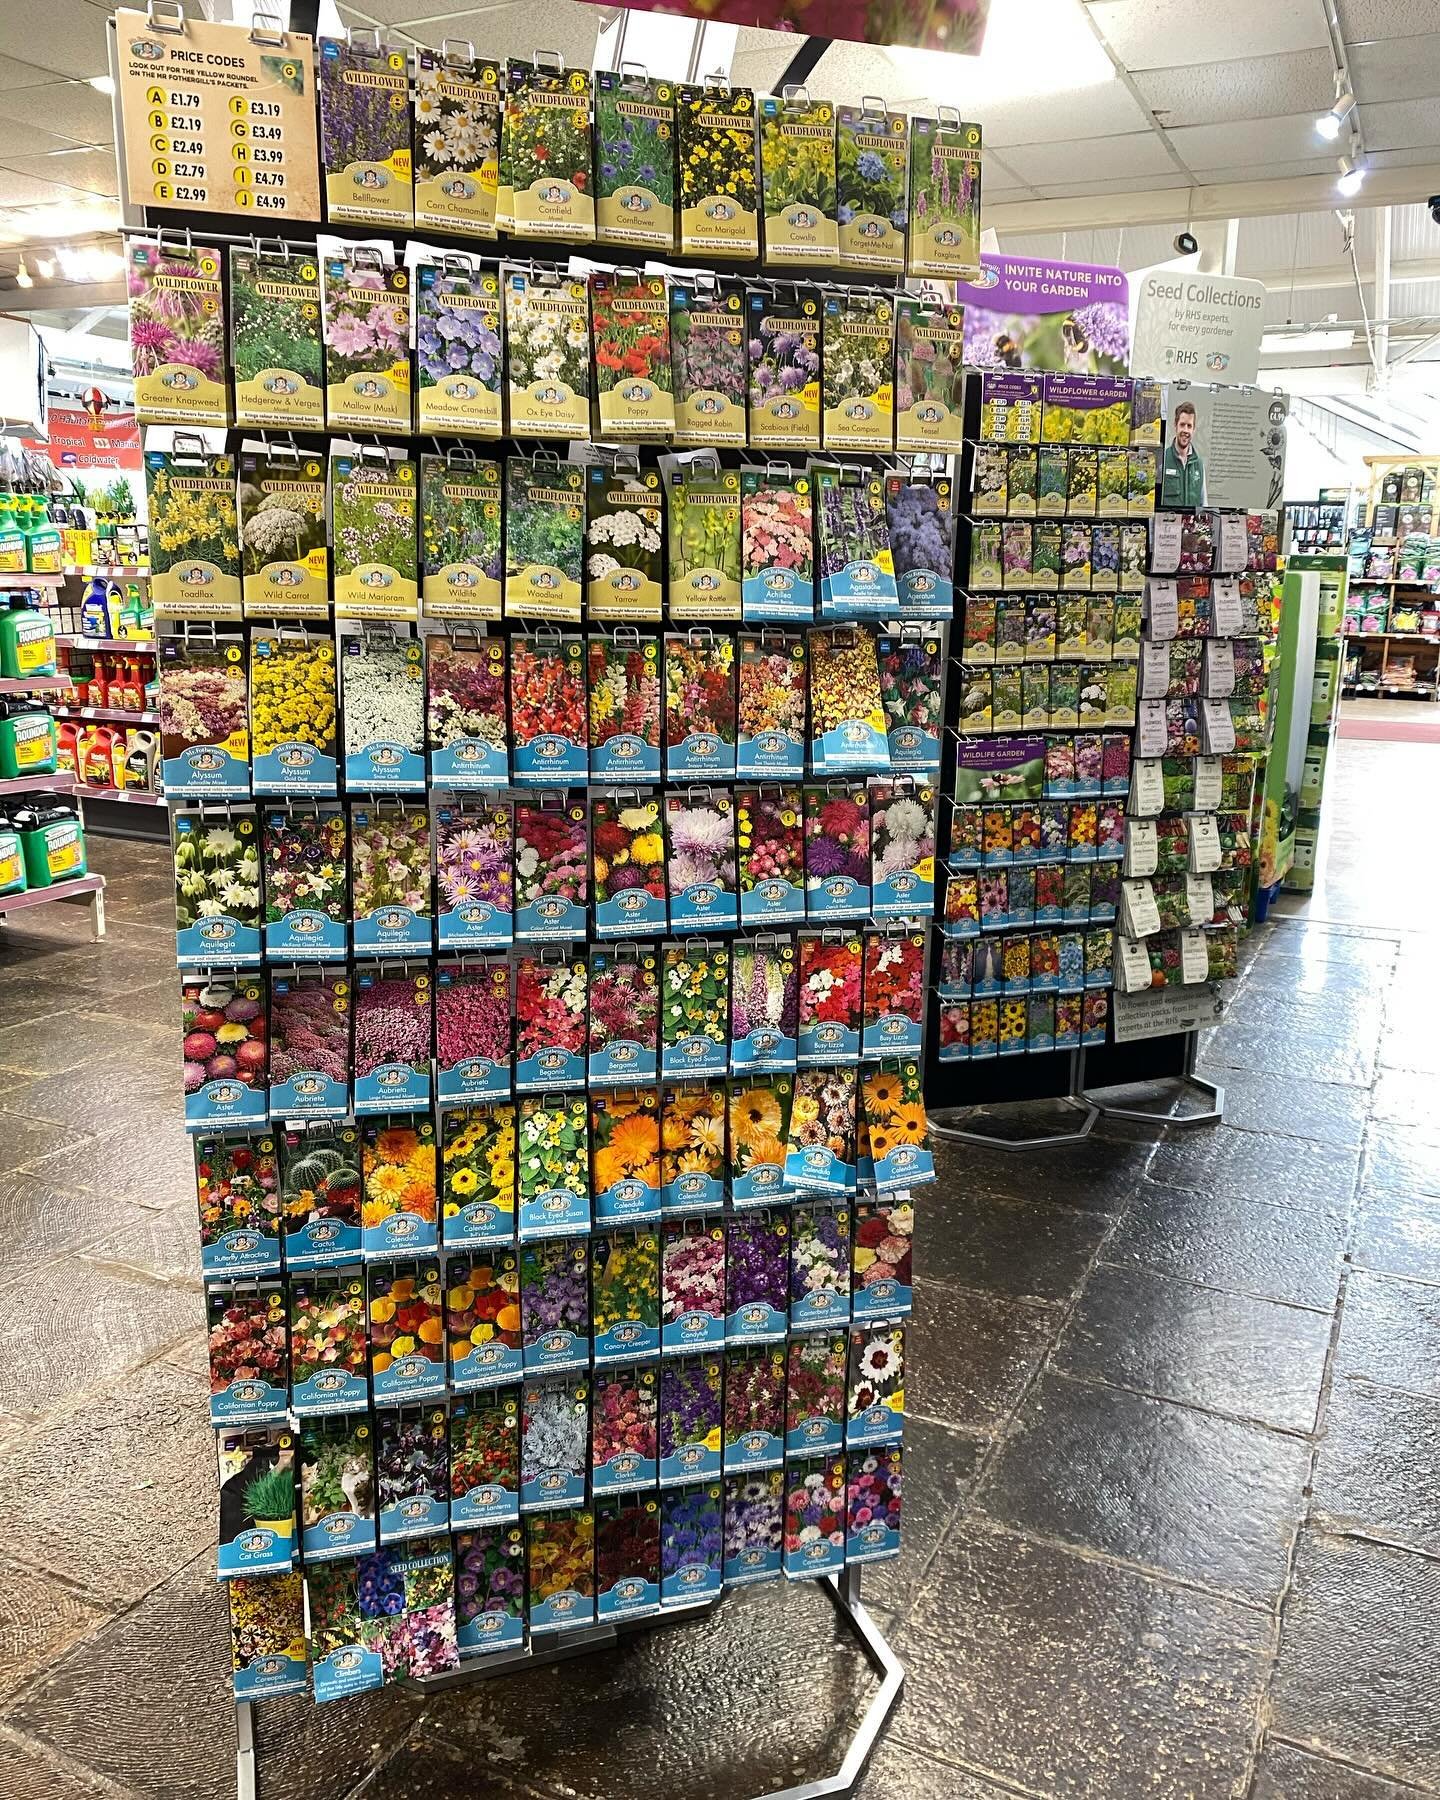 Job for April:
Sow hardy annuals, herbs and wildflower seed outdoors. 

Sowing seeds outdoors is an easy, inexpensive way of growing new plants!
.
.
.
.
.
#knightsgardencentres #woldingham #chelsham #springplanting #growyourown #seeds #mrfothergills 